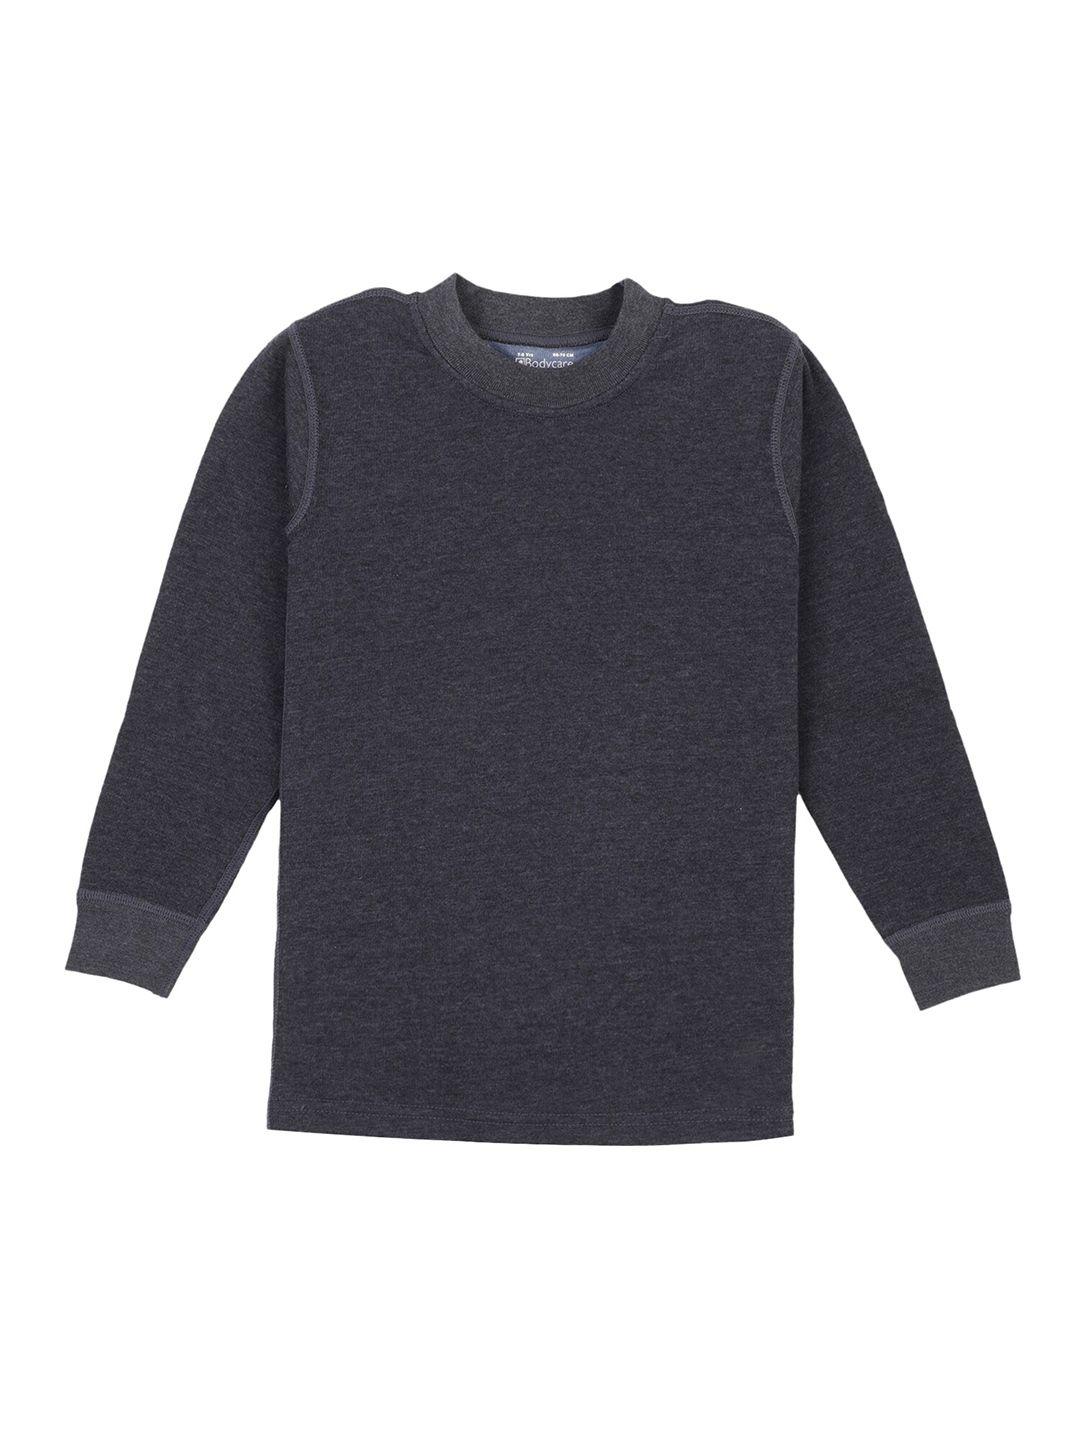 Bodycare Kids Boys Grey Solid Thermal Tops